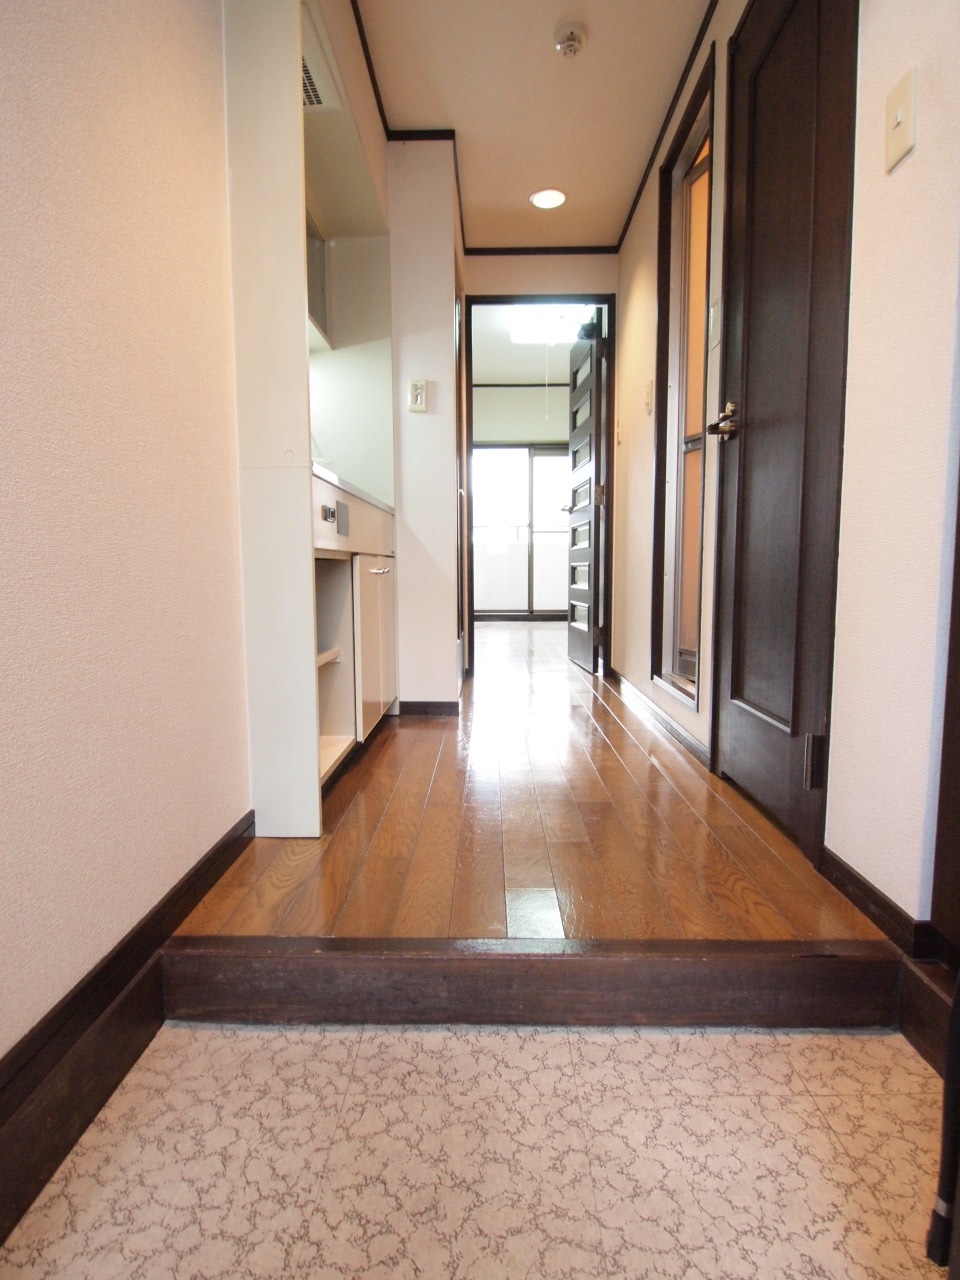 Entrance. It is the entrance space of spread ☆ 